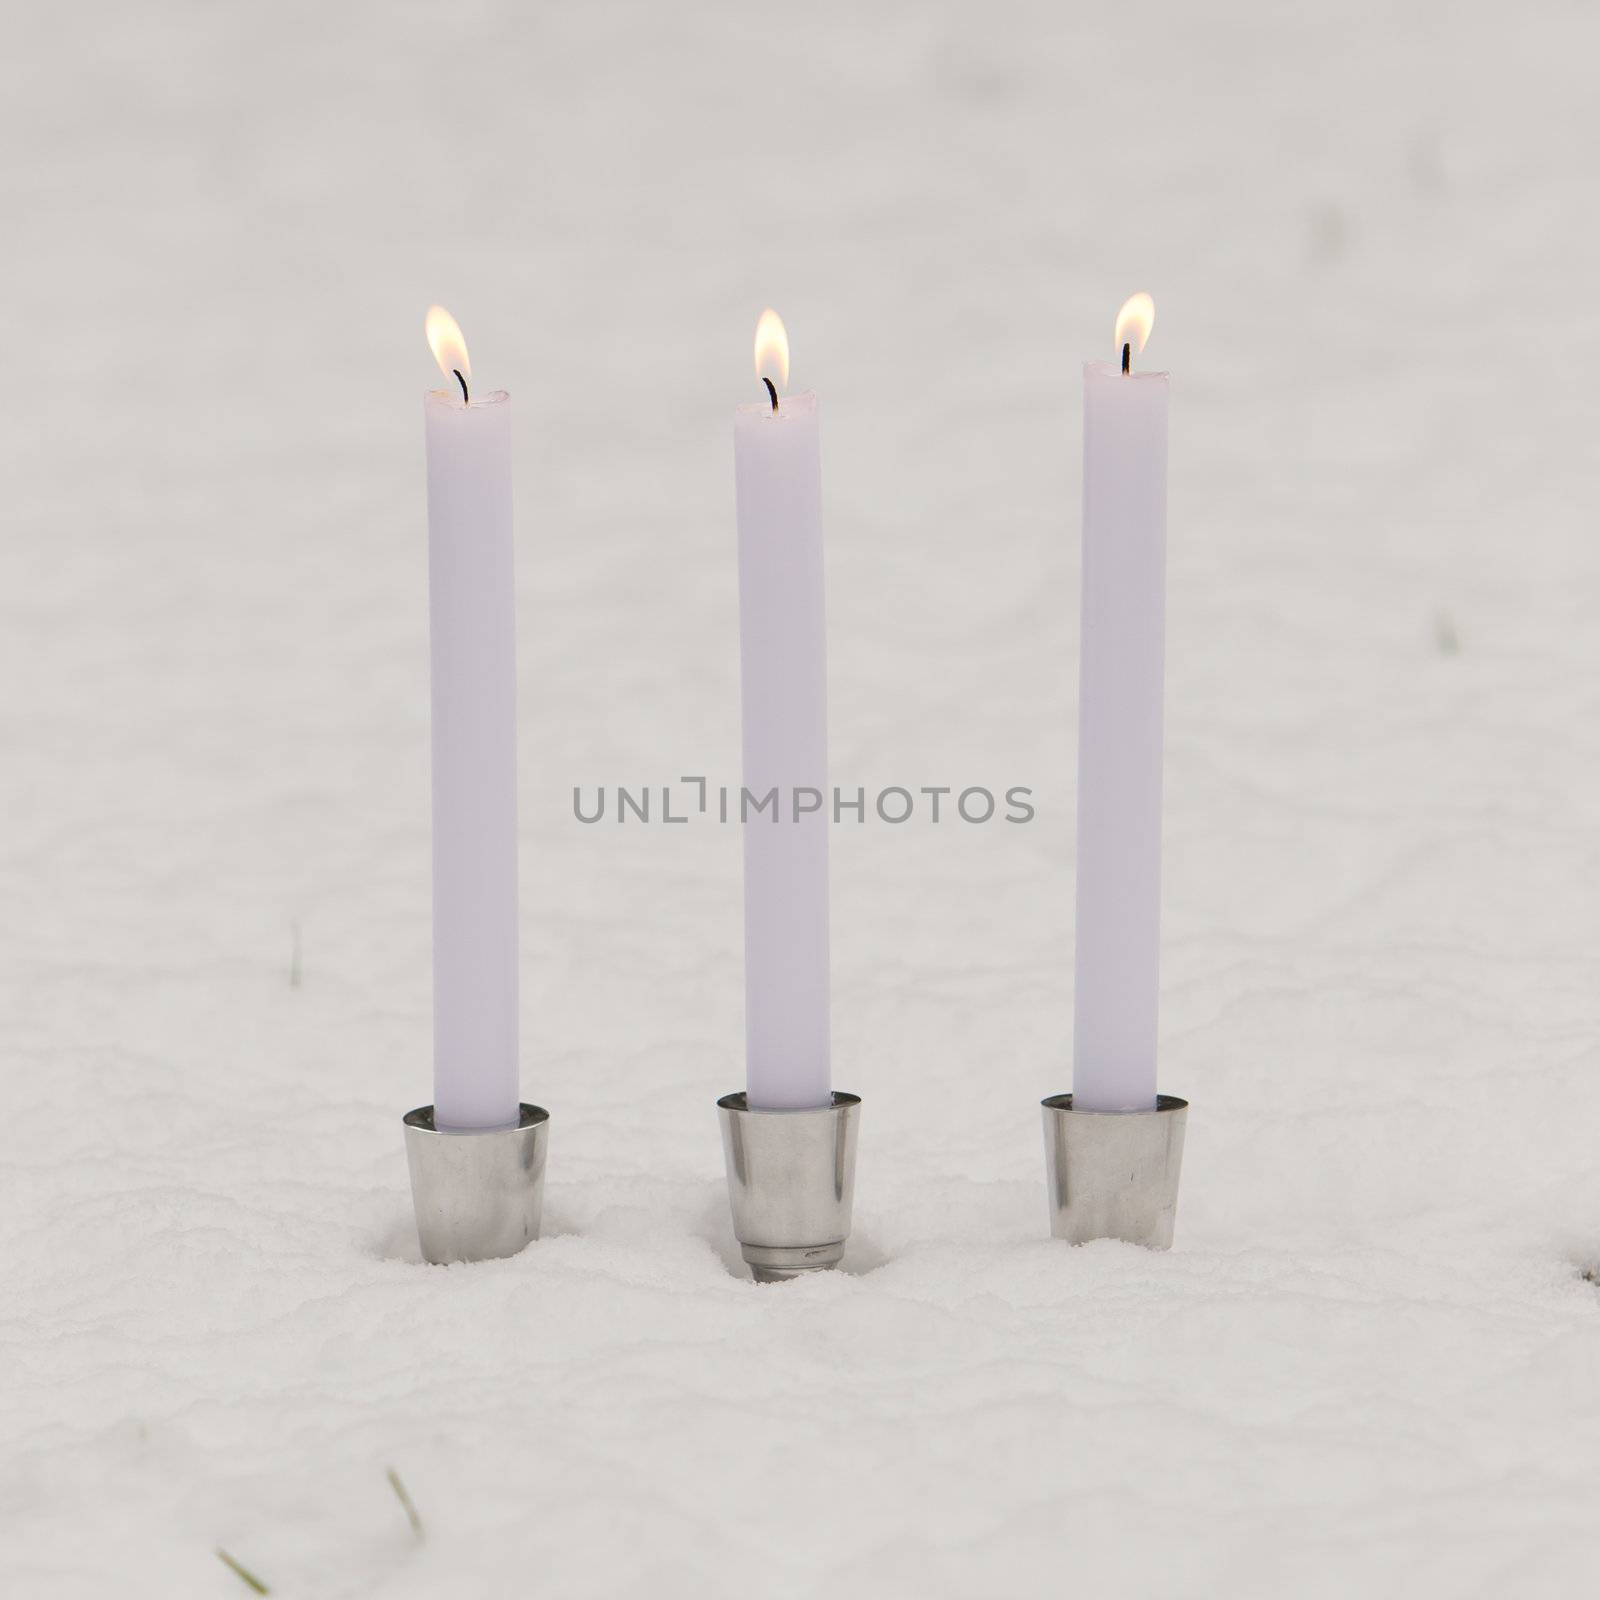 Three burning candles in the snow by michaklootwijk